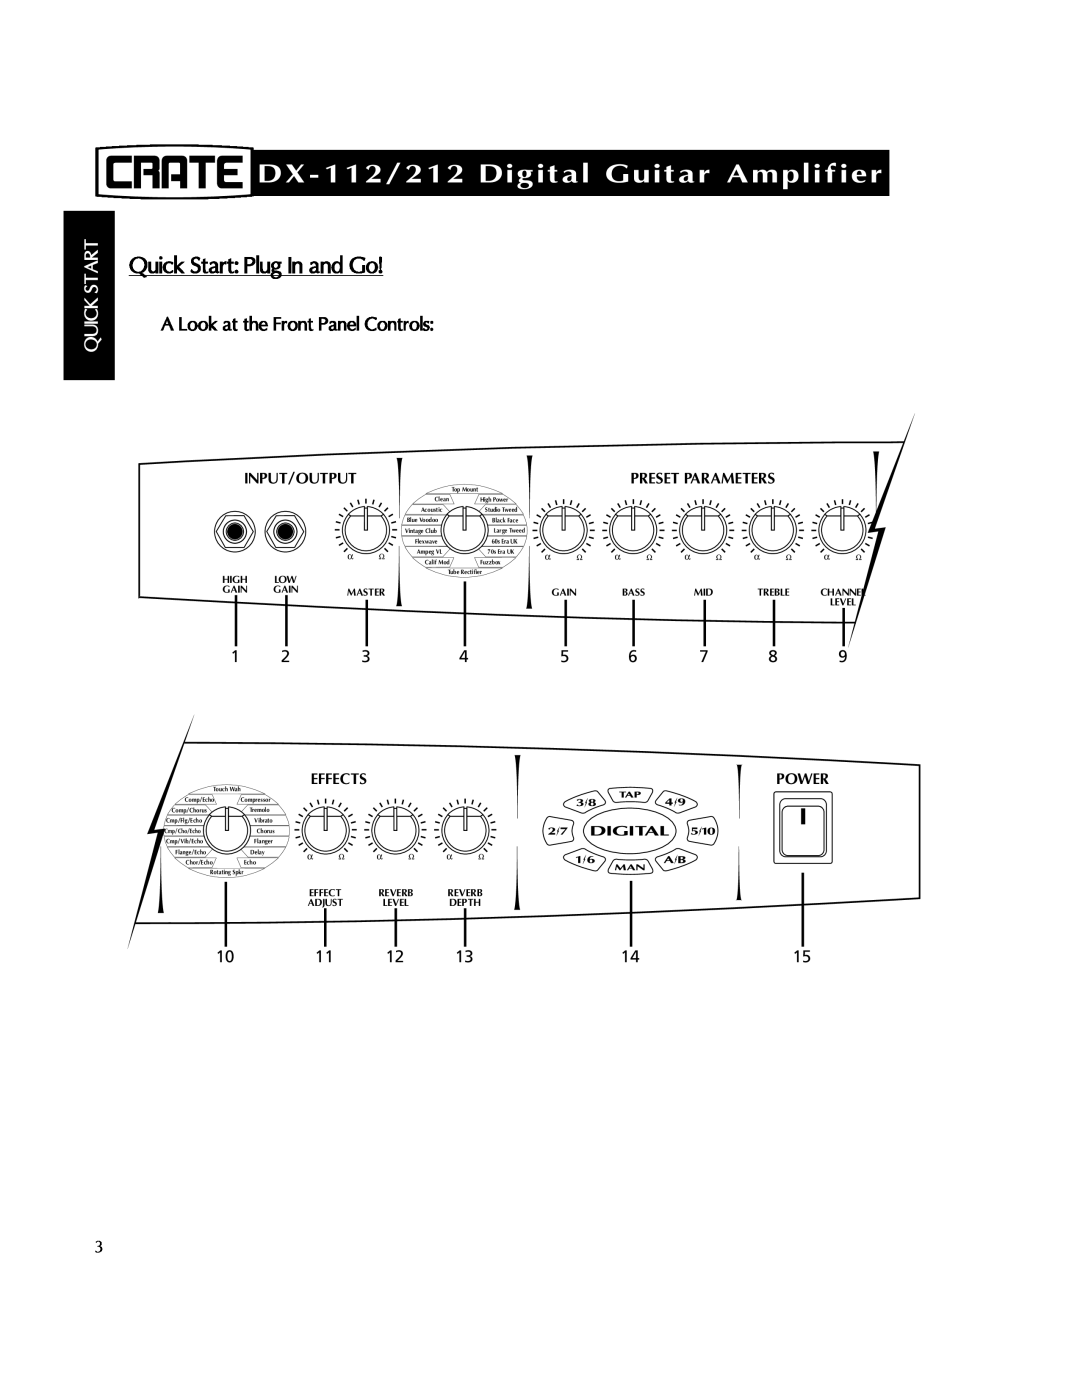 Crate Amplifiers DX-112/212Digital Guitar Amplifier, Quick Start Plug In and Go, A Look at the Front Panel Controls 